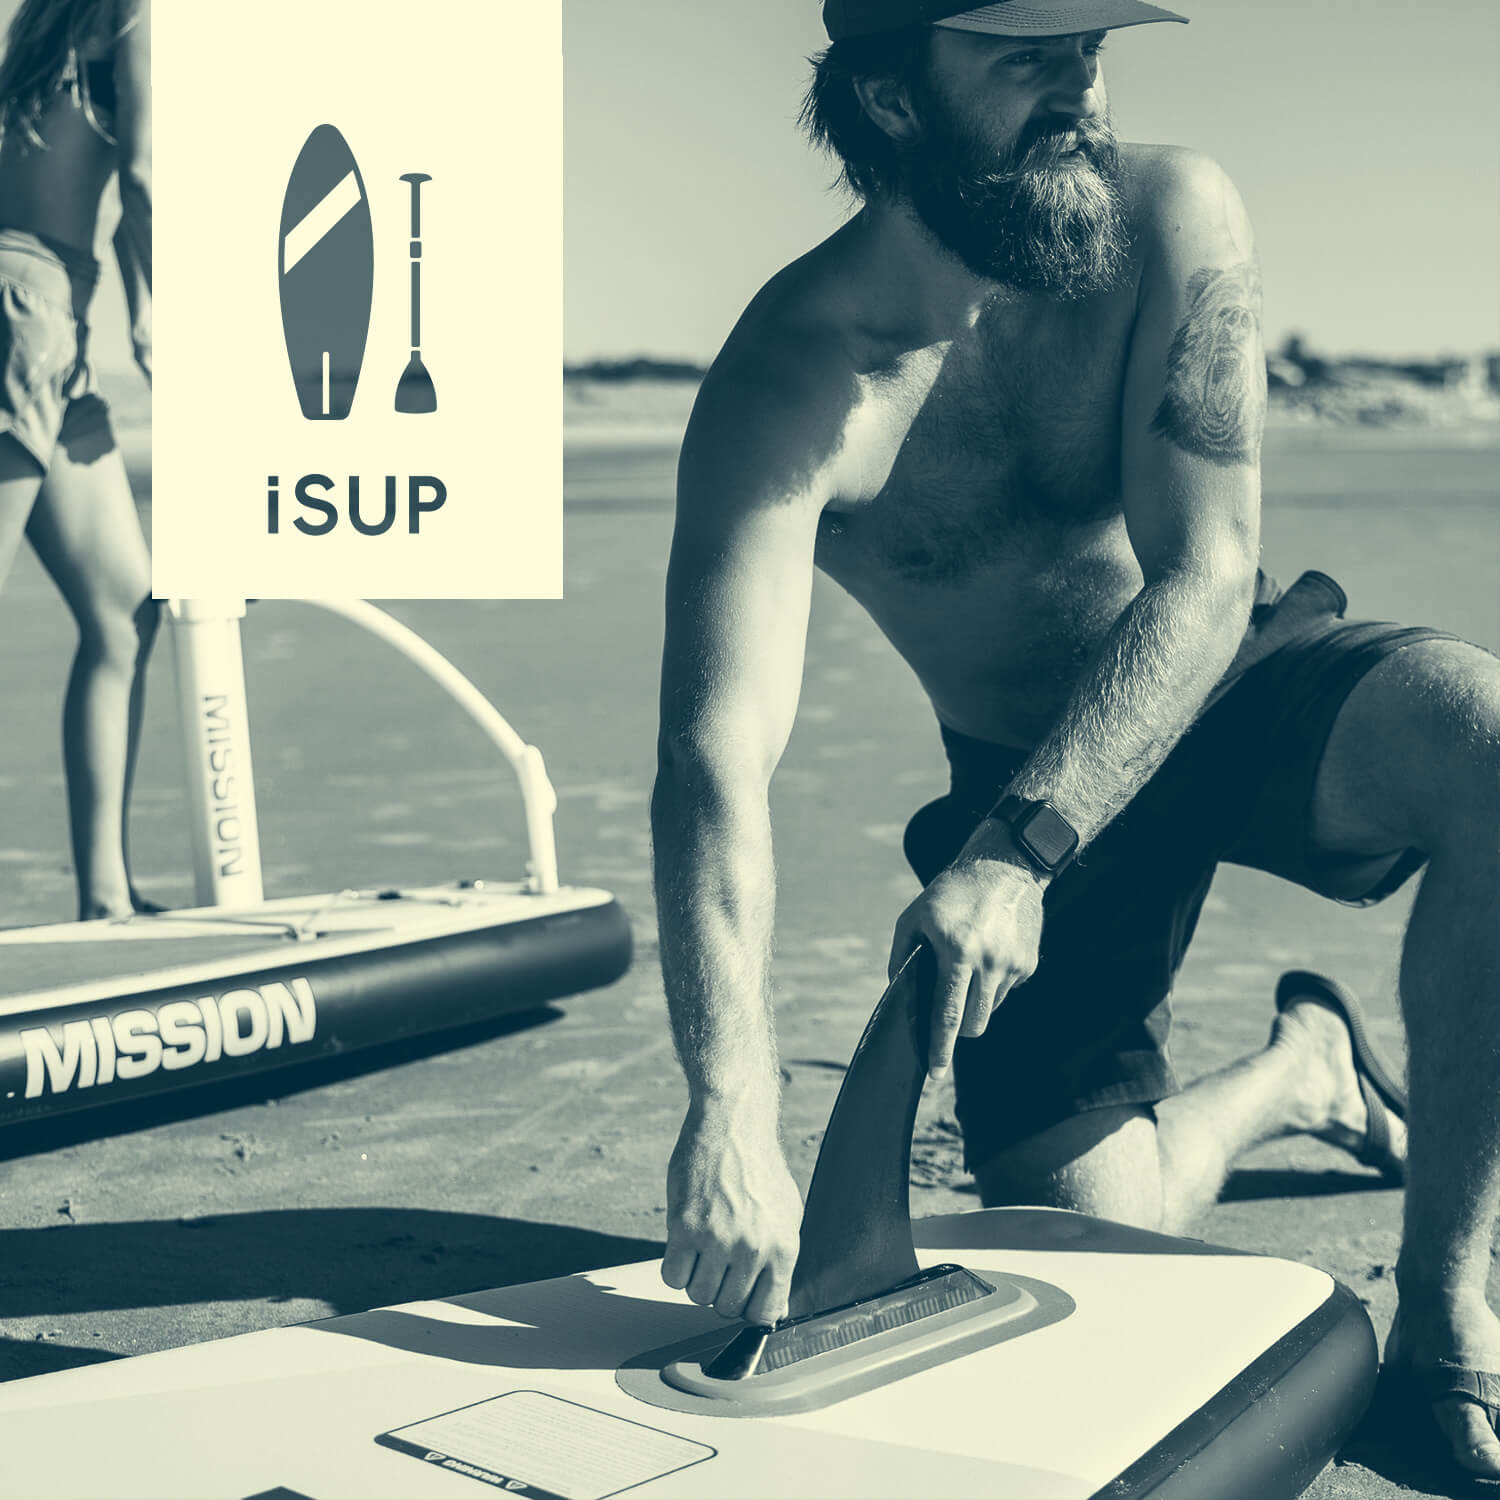 How-to Install a Fin on an Inflatable Stand-up Paddleboard